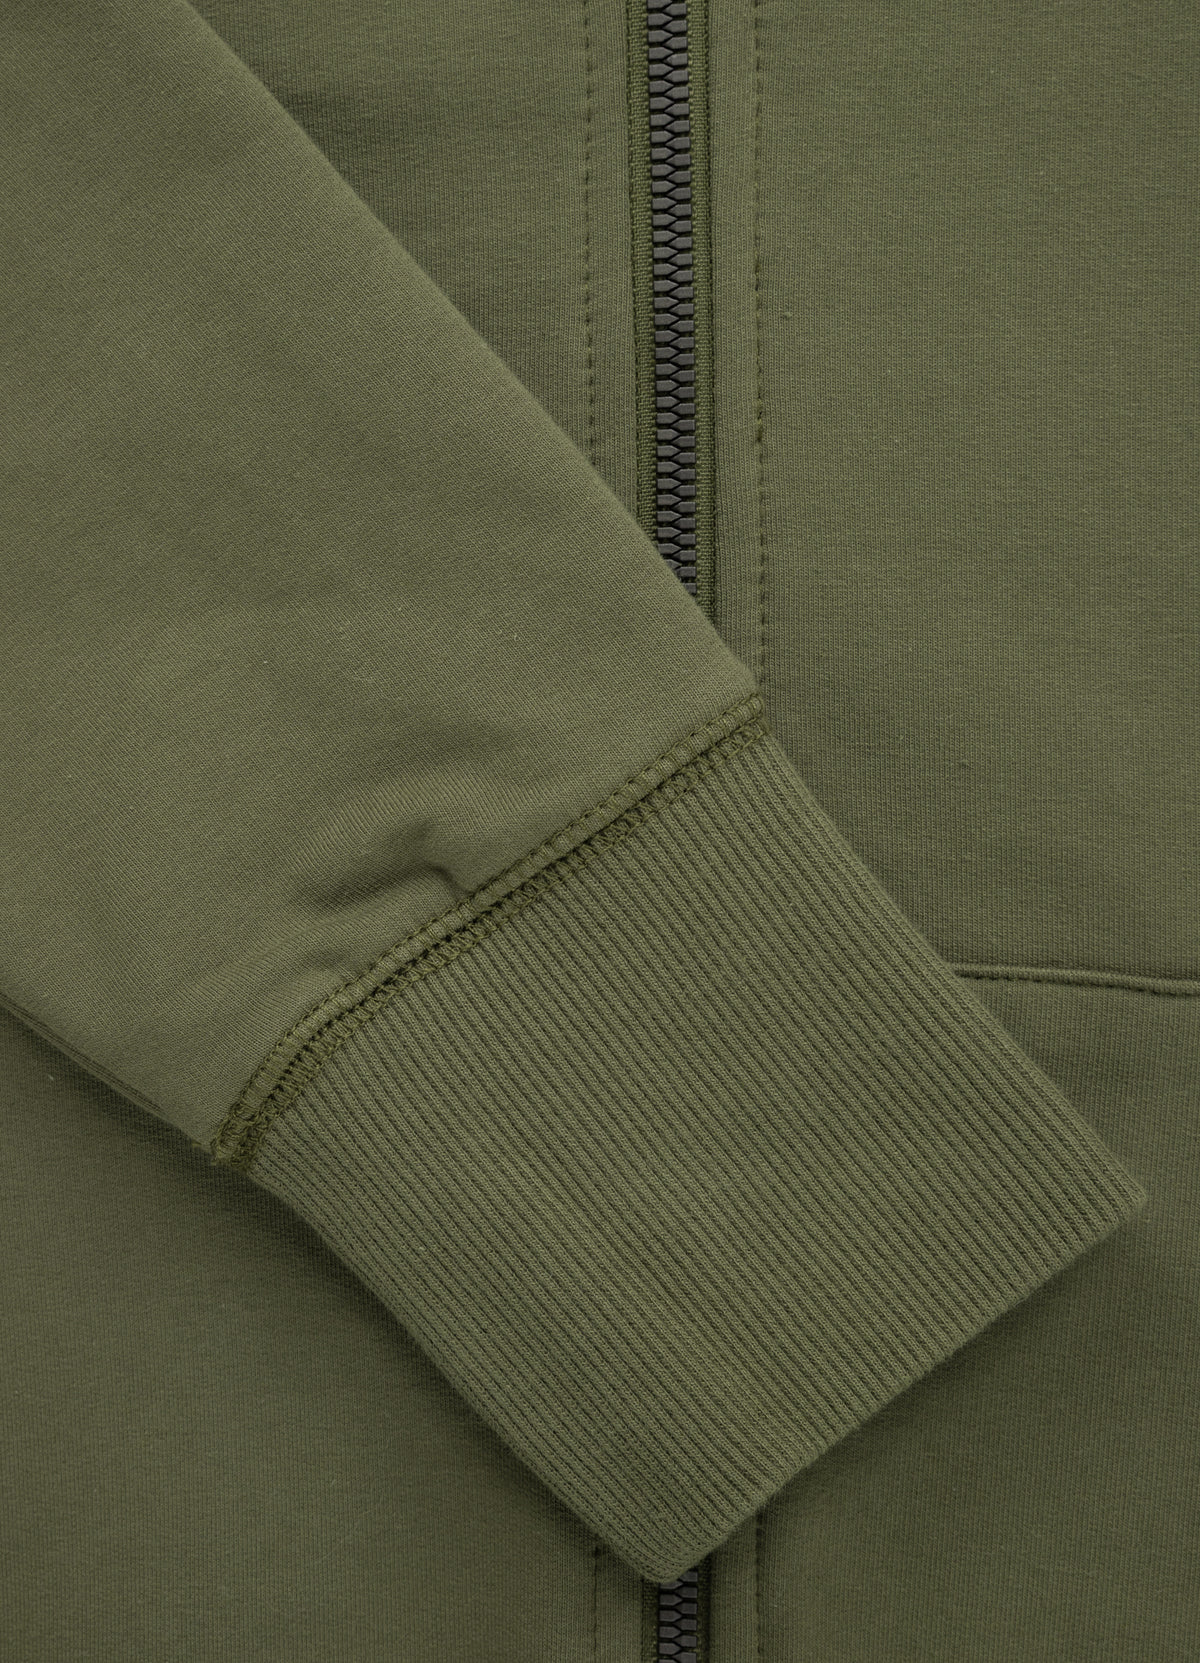 SMALL LOGO FRENCH TERRY 21 Olive Hooded Zip.